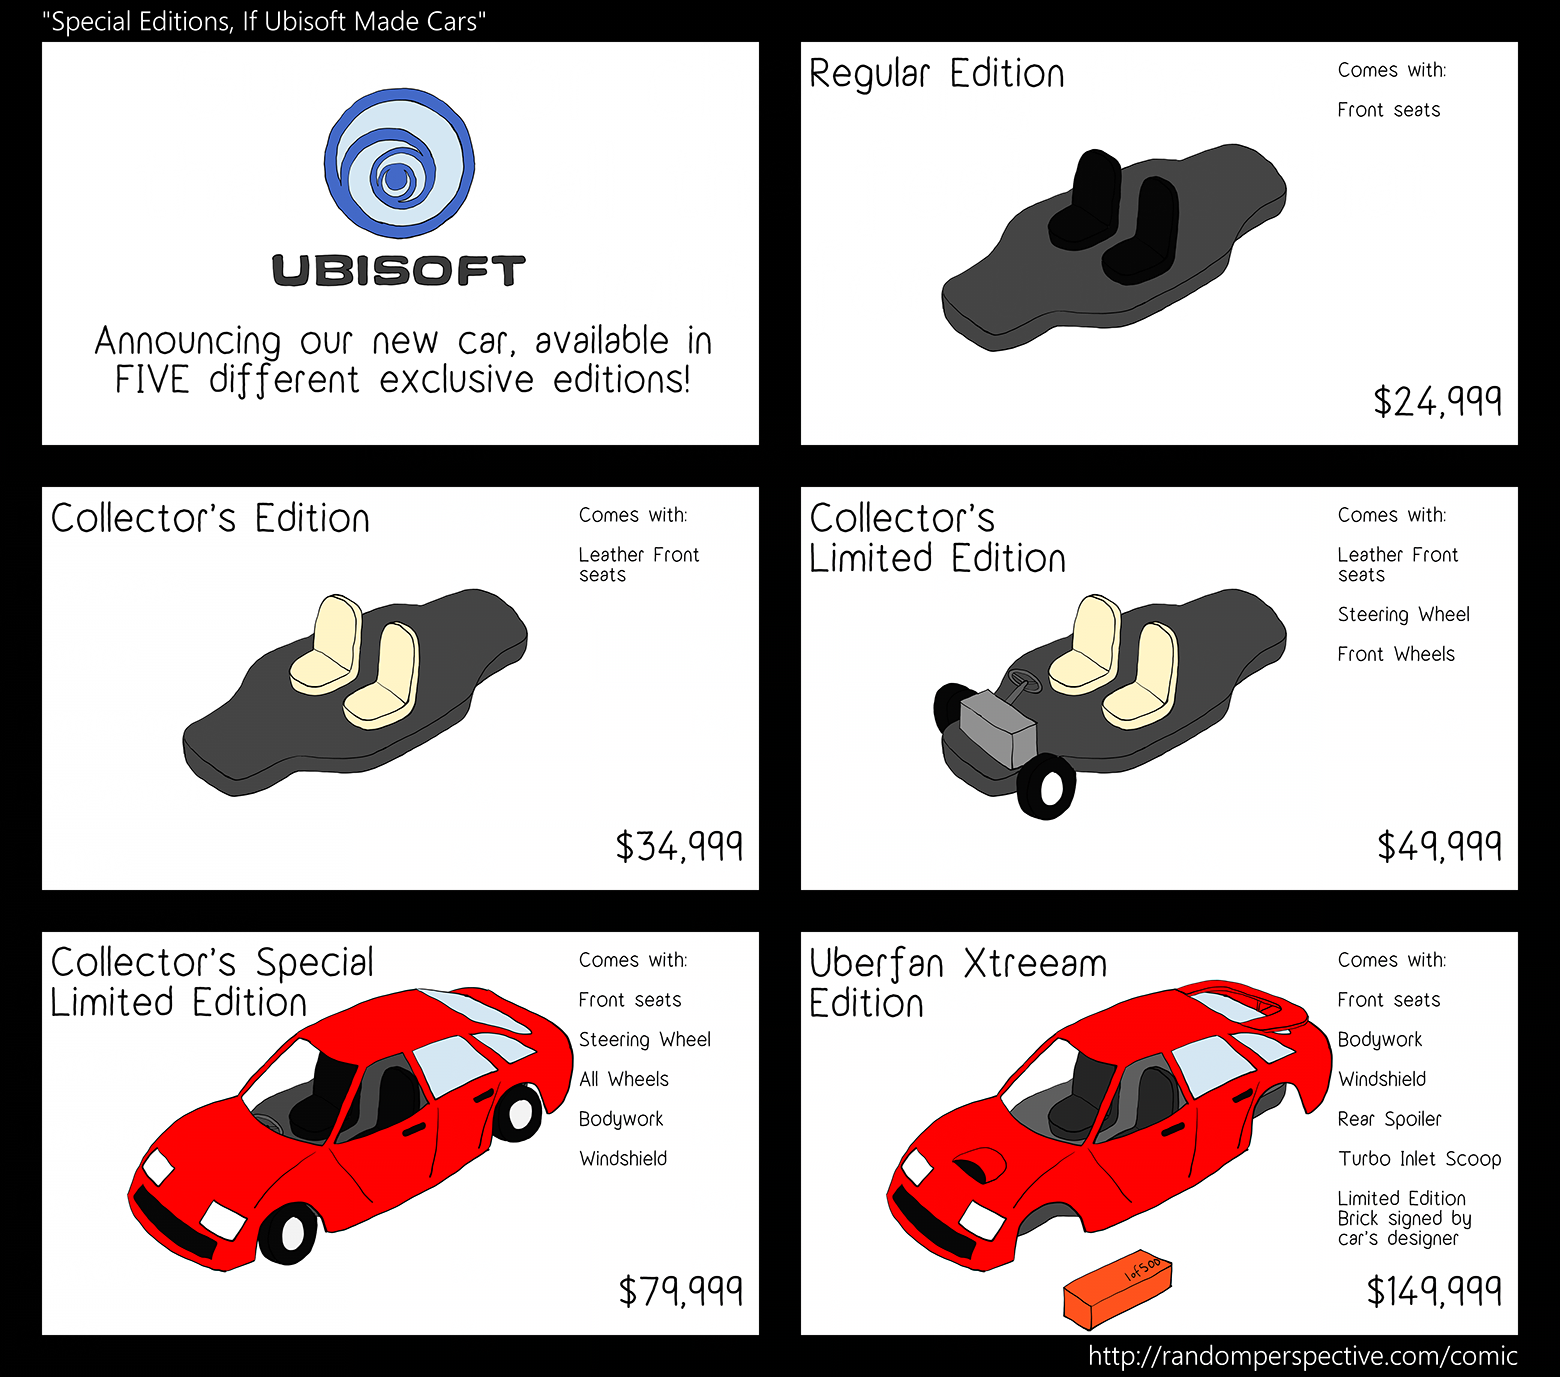 Special Editions: If Ubisoft Made Cars